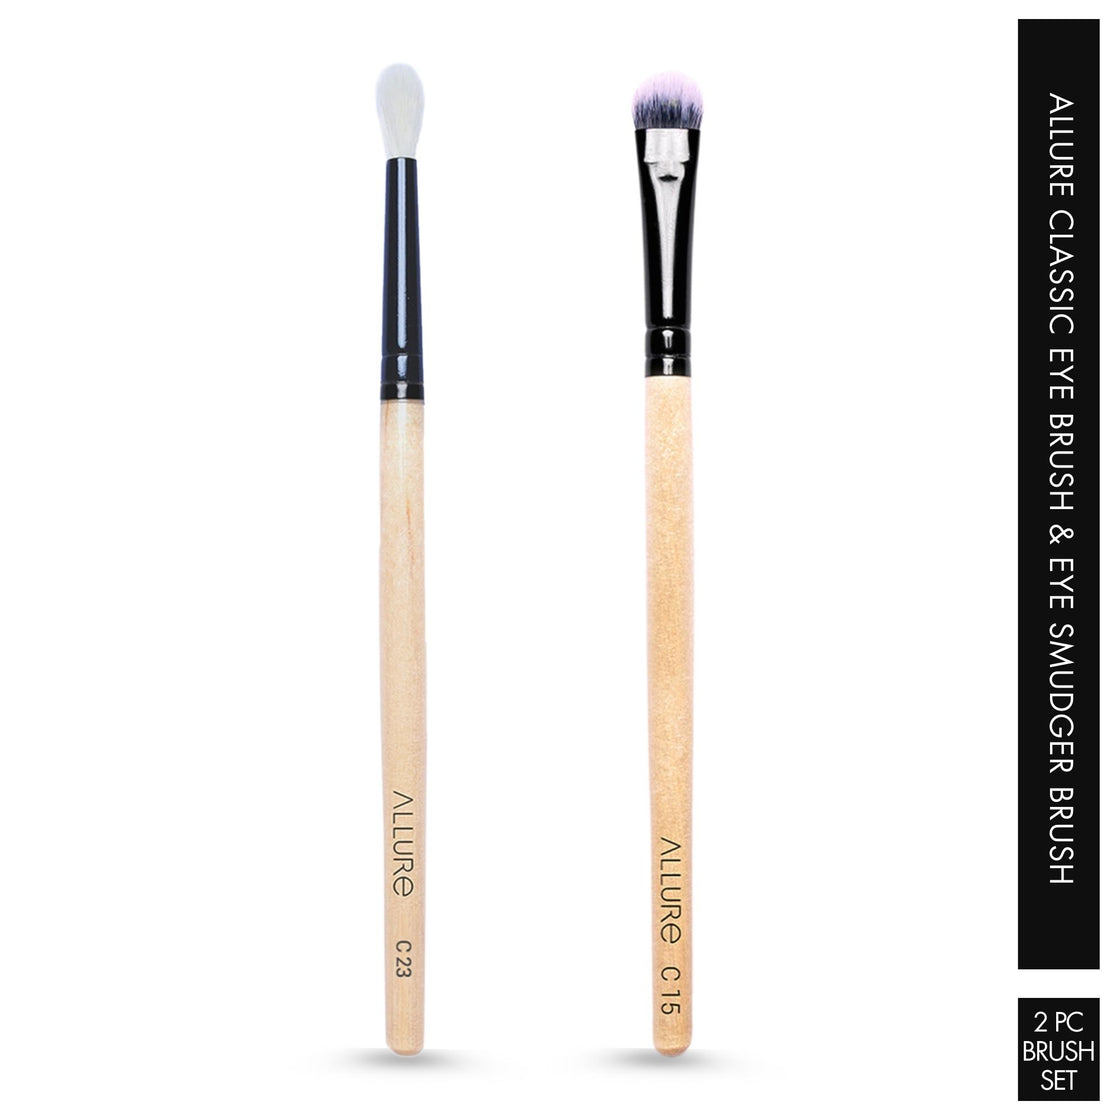 Allure Classic Eye Brush and Eye Smudger Set of 02